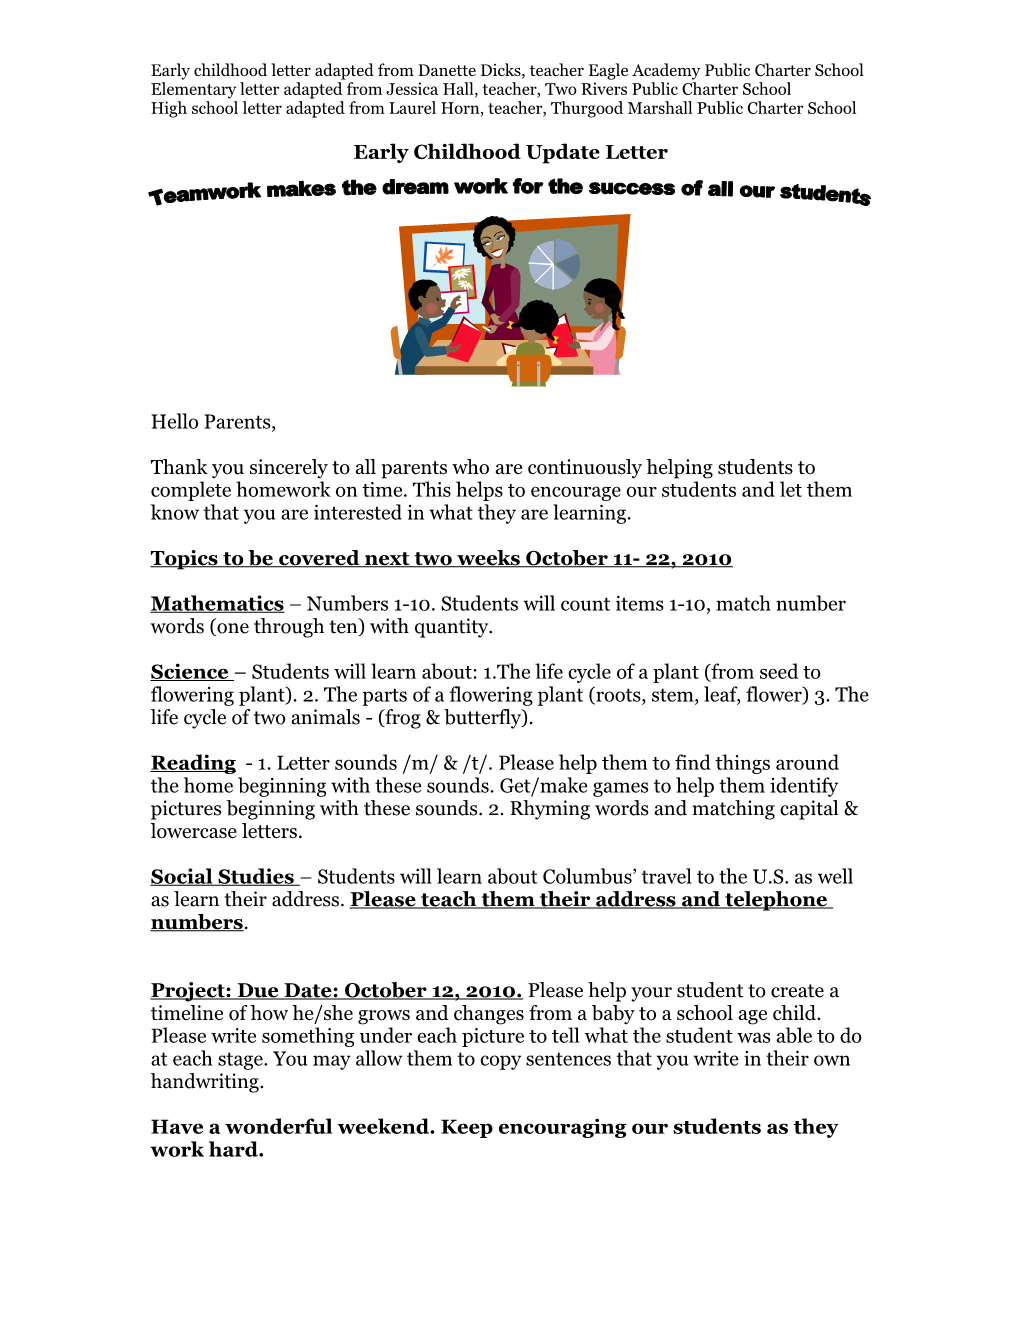 Early Childhood Letter Adapted from Danette Dicks, Teacher Eagle Academy Public Charter School